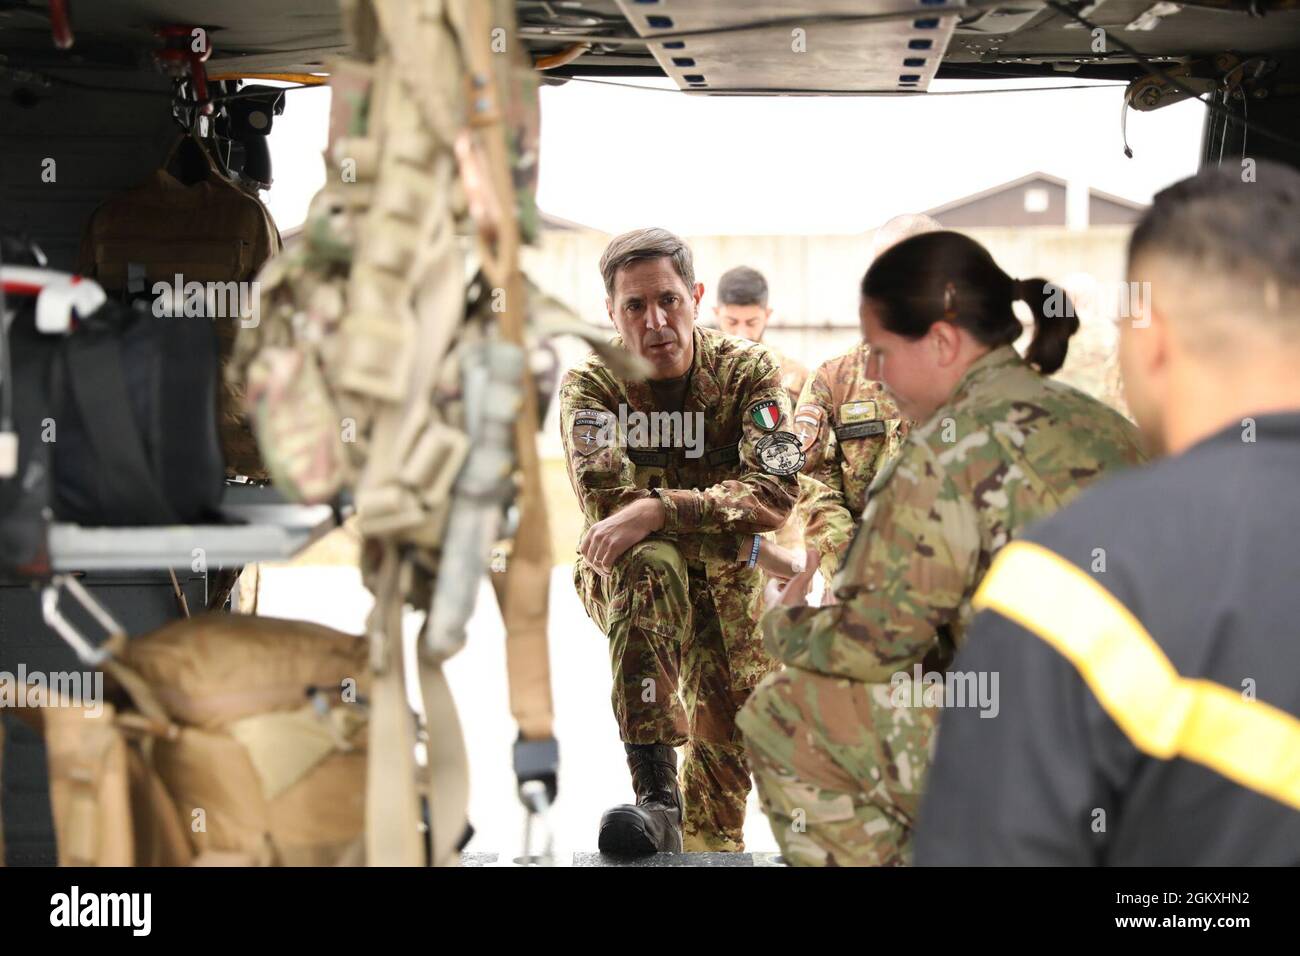 Italian Army Gen. D. Franco Federici, NATO Kosovo Force commander (COMKFOR), looks on as U.S. Army Sgt. Joanna Adams of C Company, 1st Battalion, 169th Aviation Regiment, gives instruction on patient loading procedures for Medevac missions at Camp Bondsteel, Kosovo July 16, 2021. COMKFOR and his staff were visiting with various NATO partners to see how they perform their missions. This image was electronically cropped and ethically enhanced to emphasize the subject and does not misrepresent the subject or the original image in any way. Stock Photo